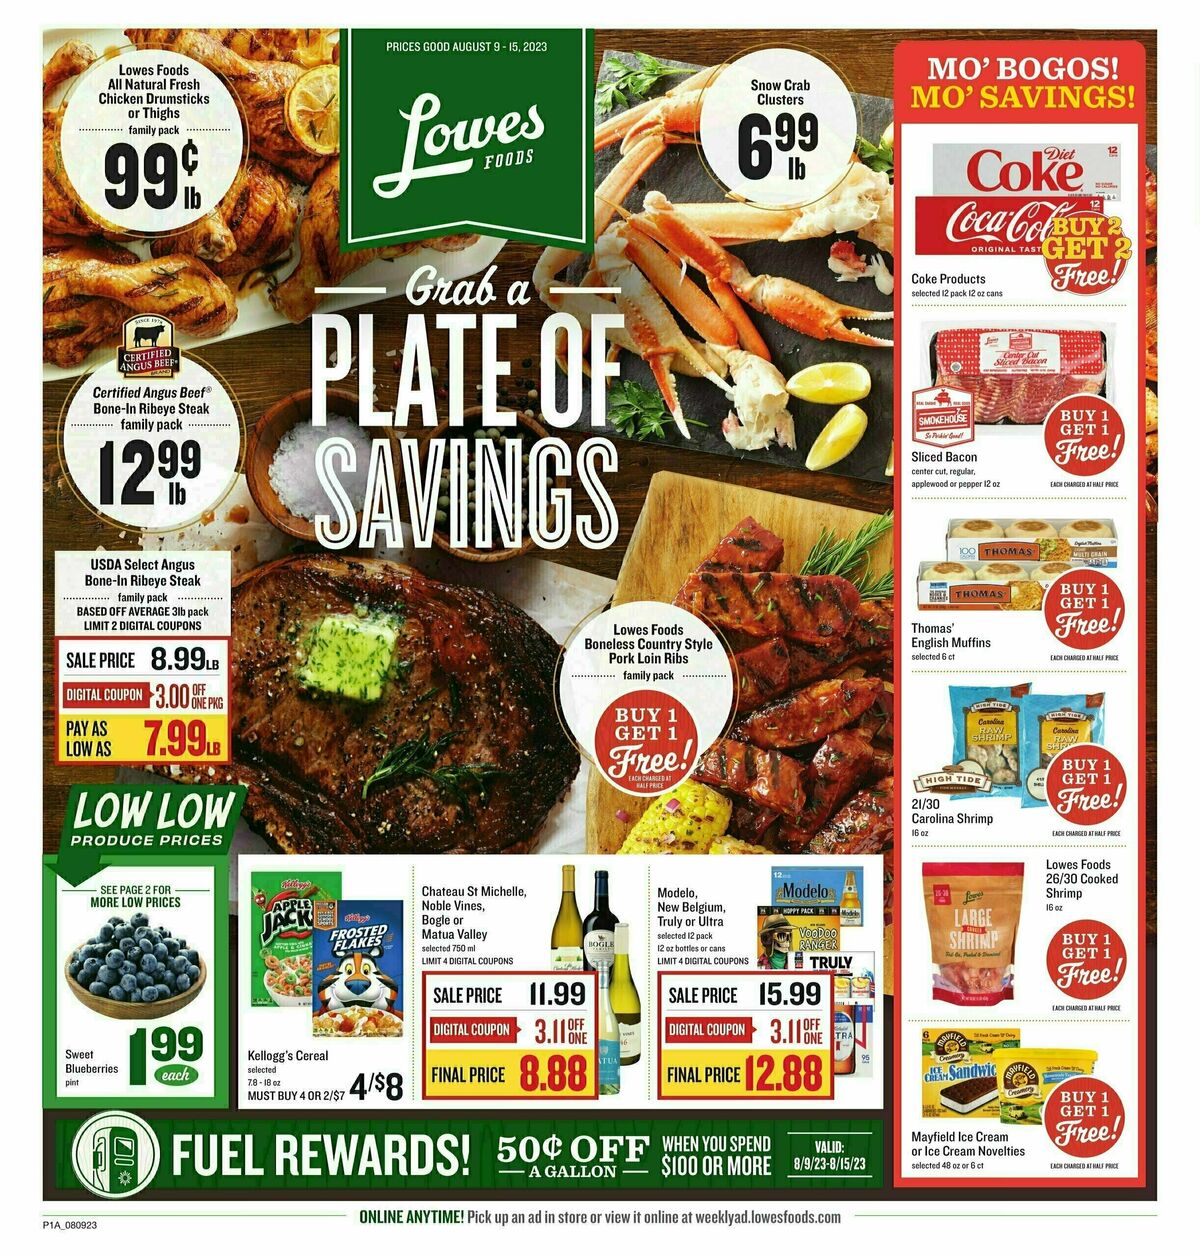 Lowes Foods Weekly Ad from August 9